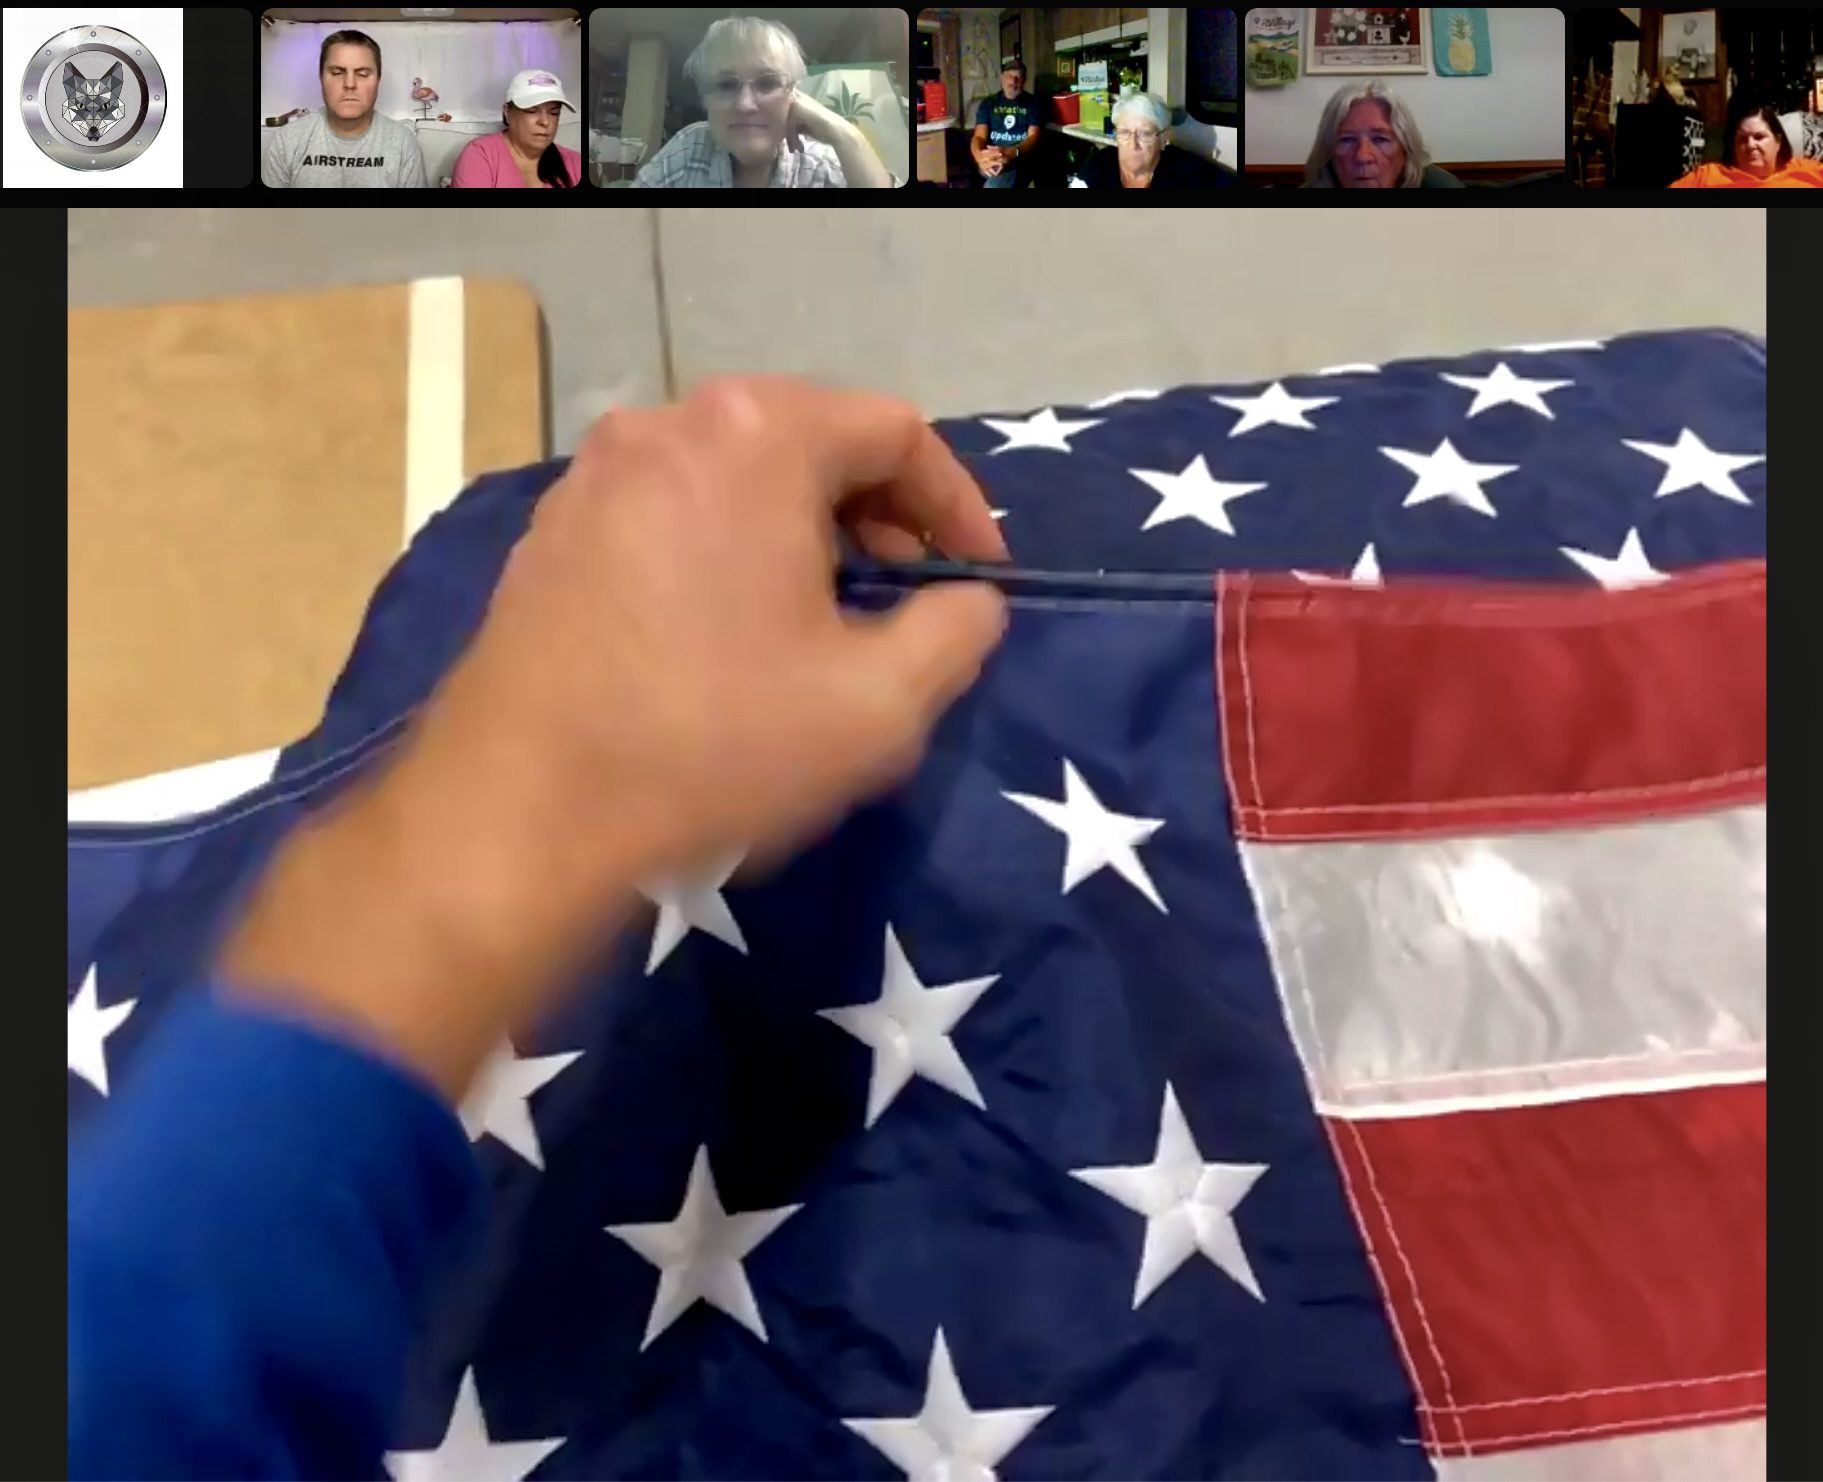 Online Zoom tour of Allegiance Flag Company